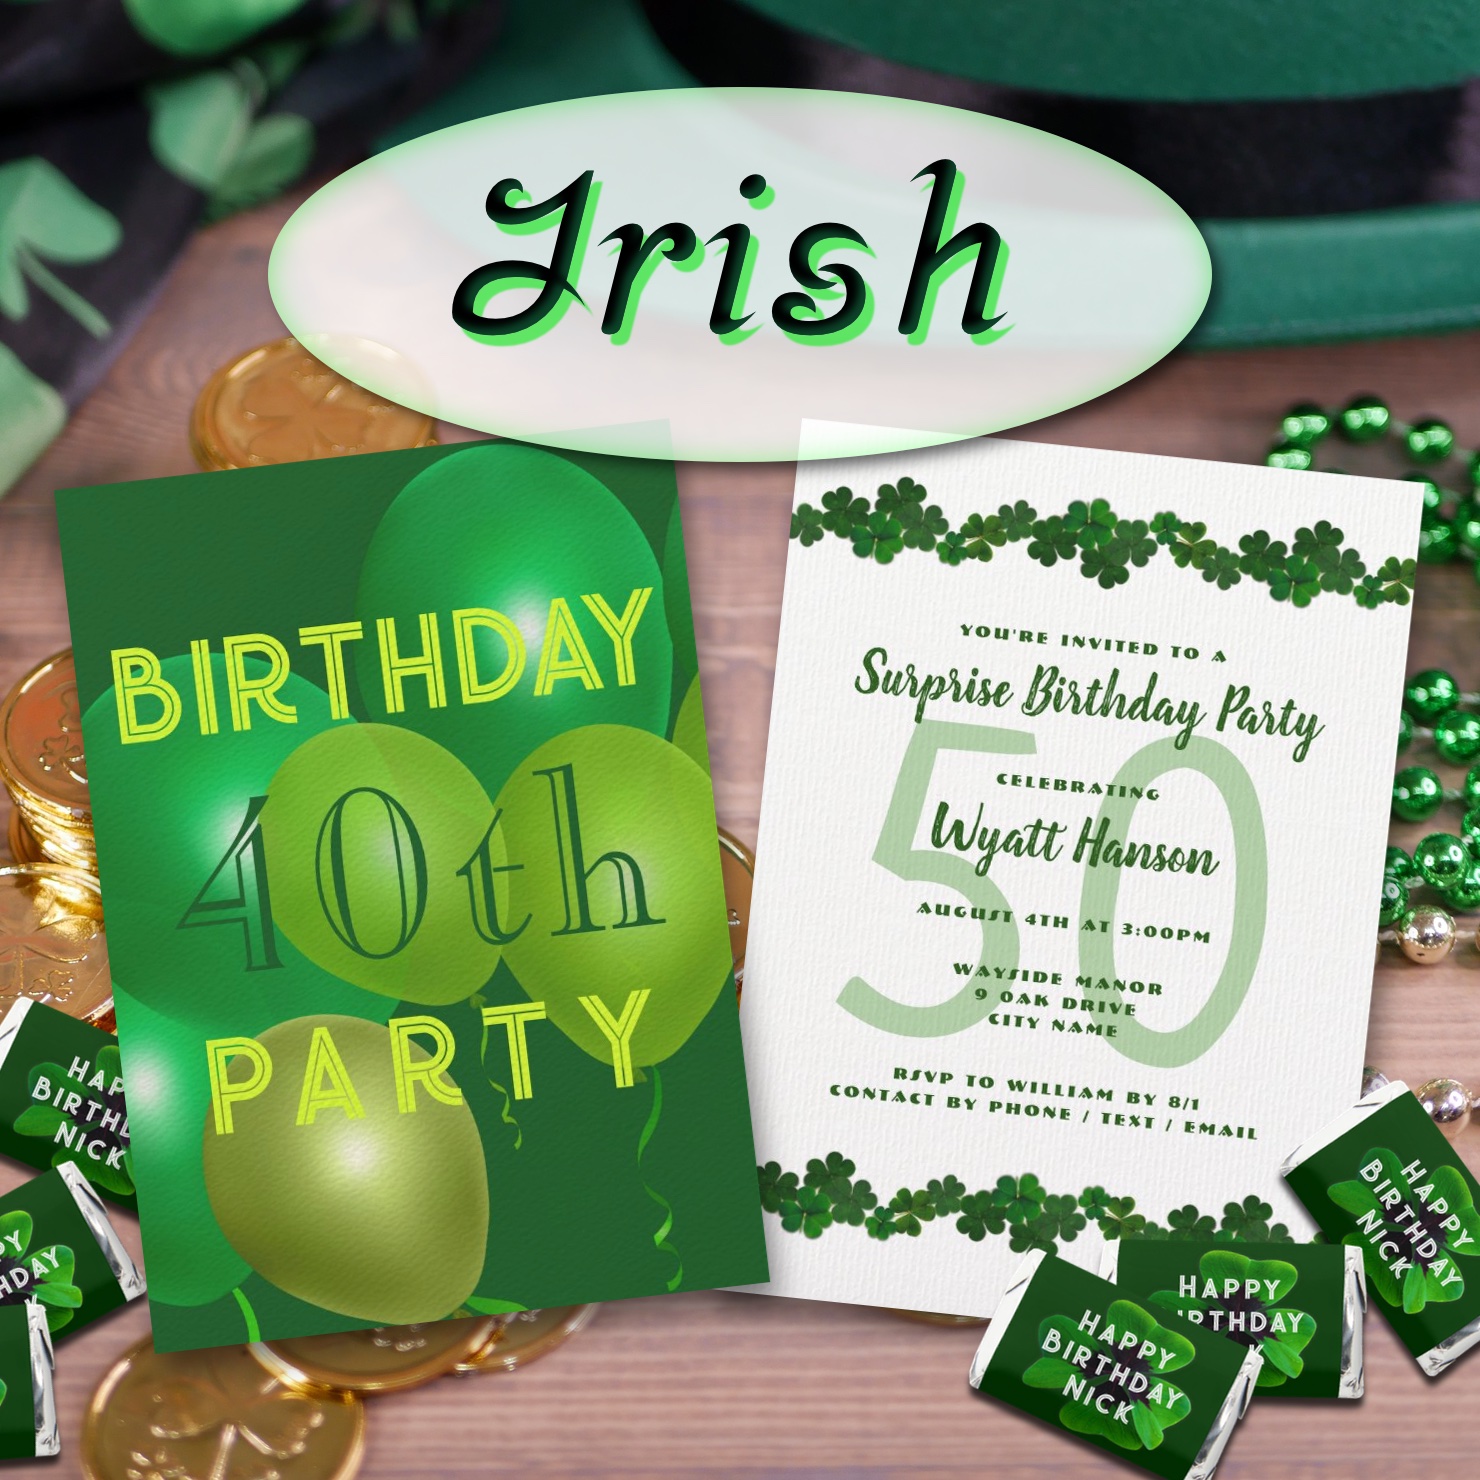 St. Patrick's Day celebrations and birthday party invitations.